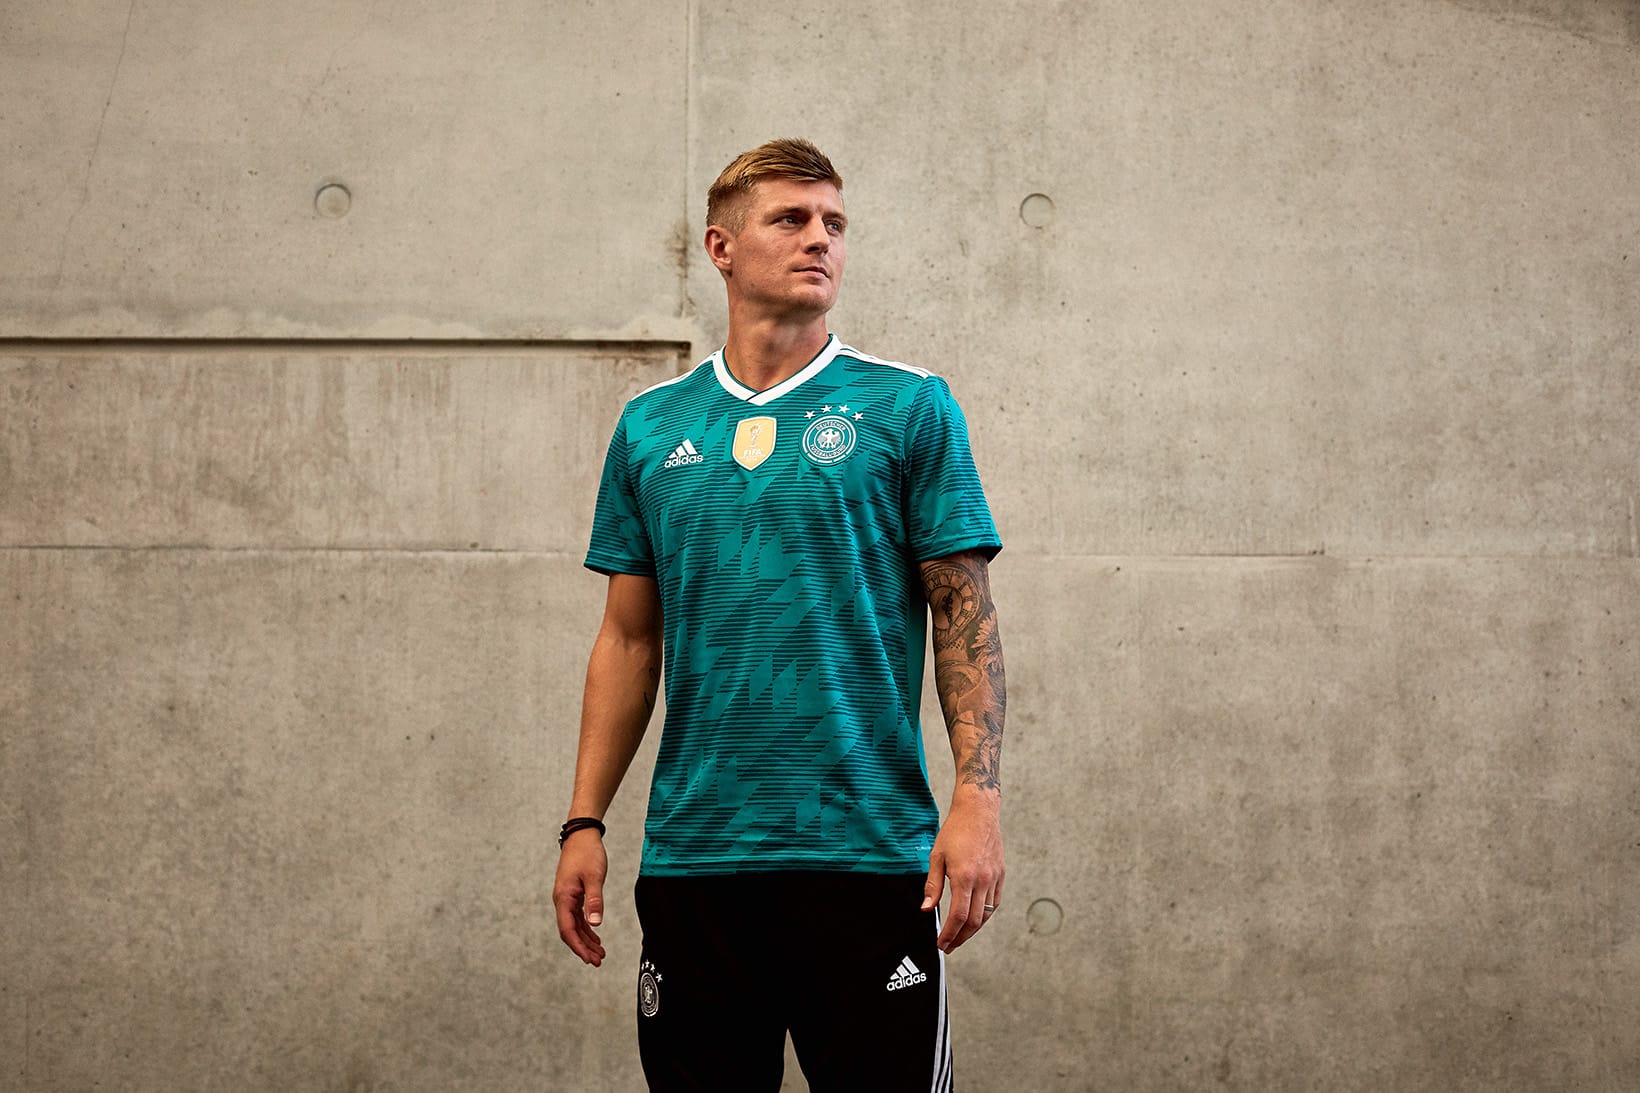 adidas 2018 World Cup Kits for Germany \u0026 More | HYPEBEAST